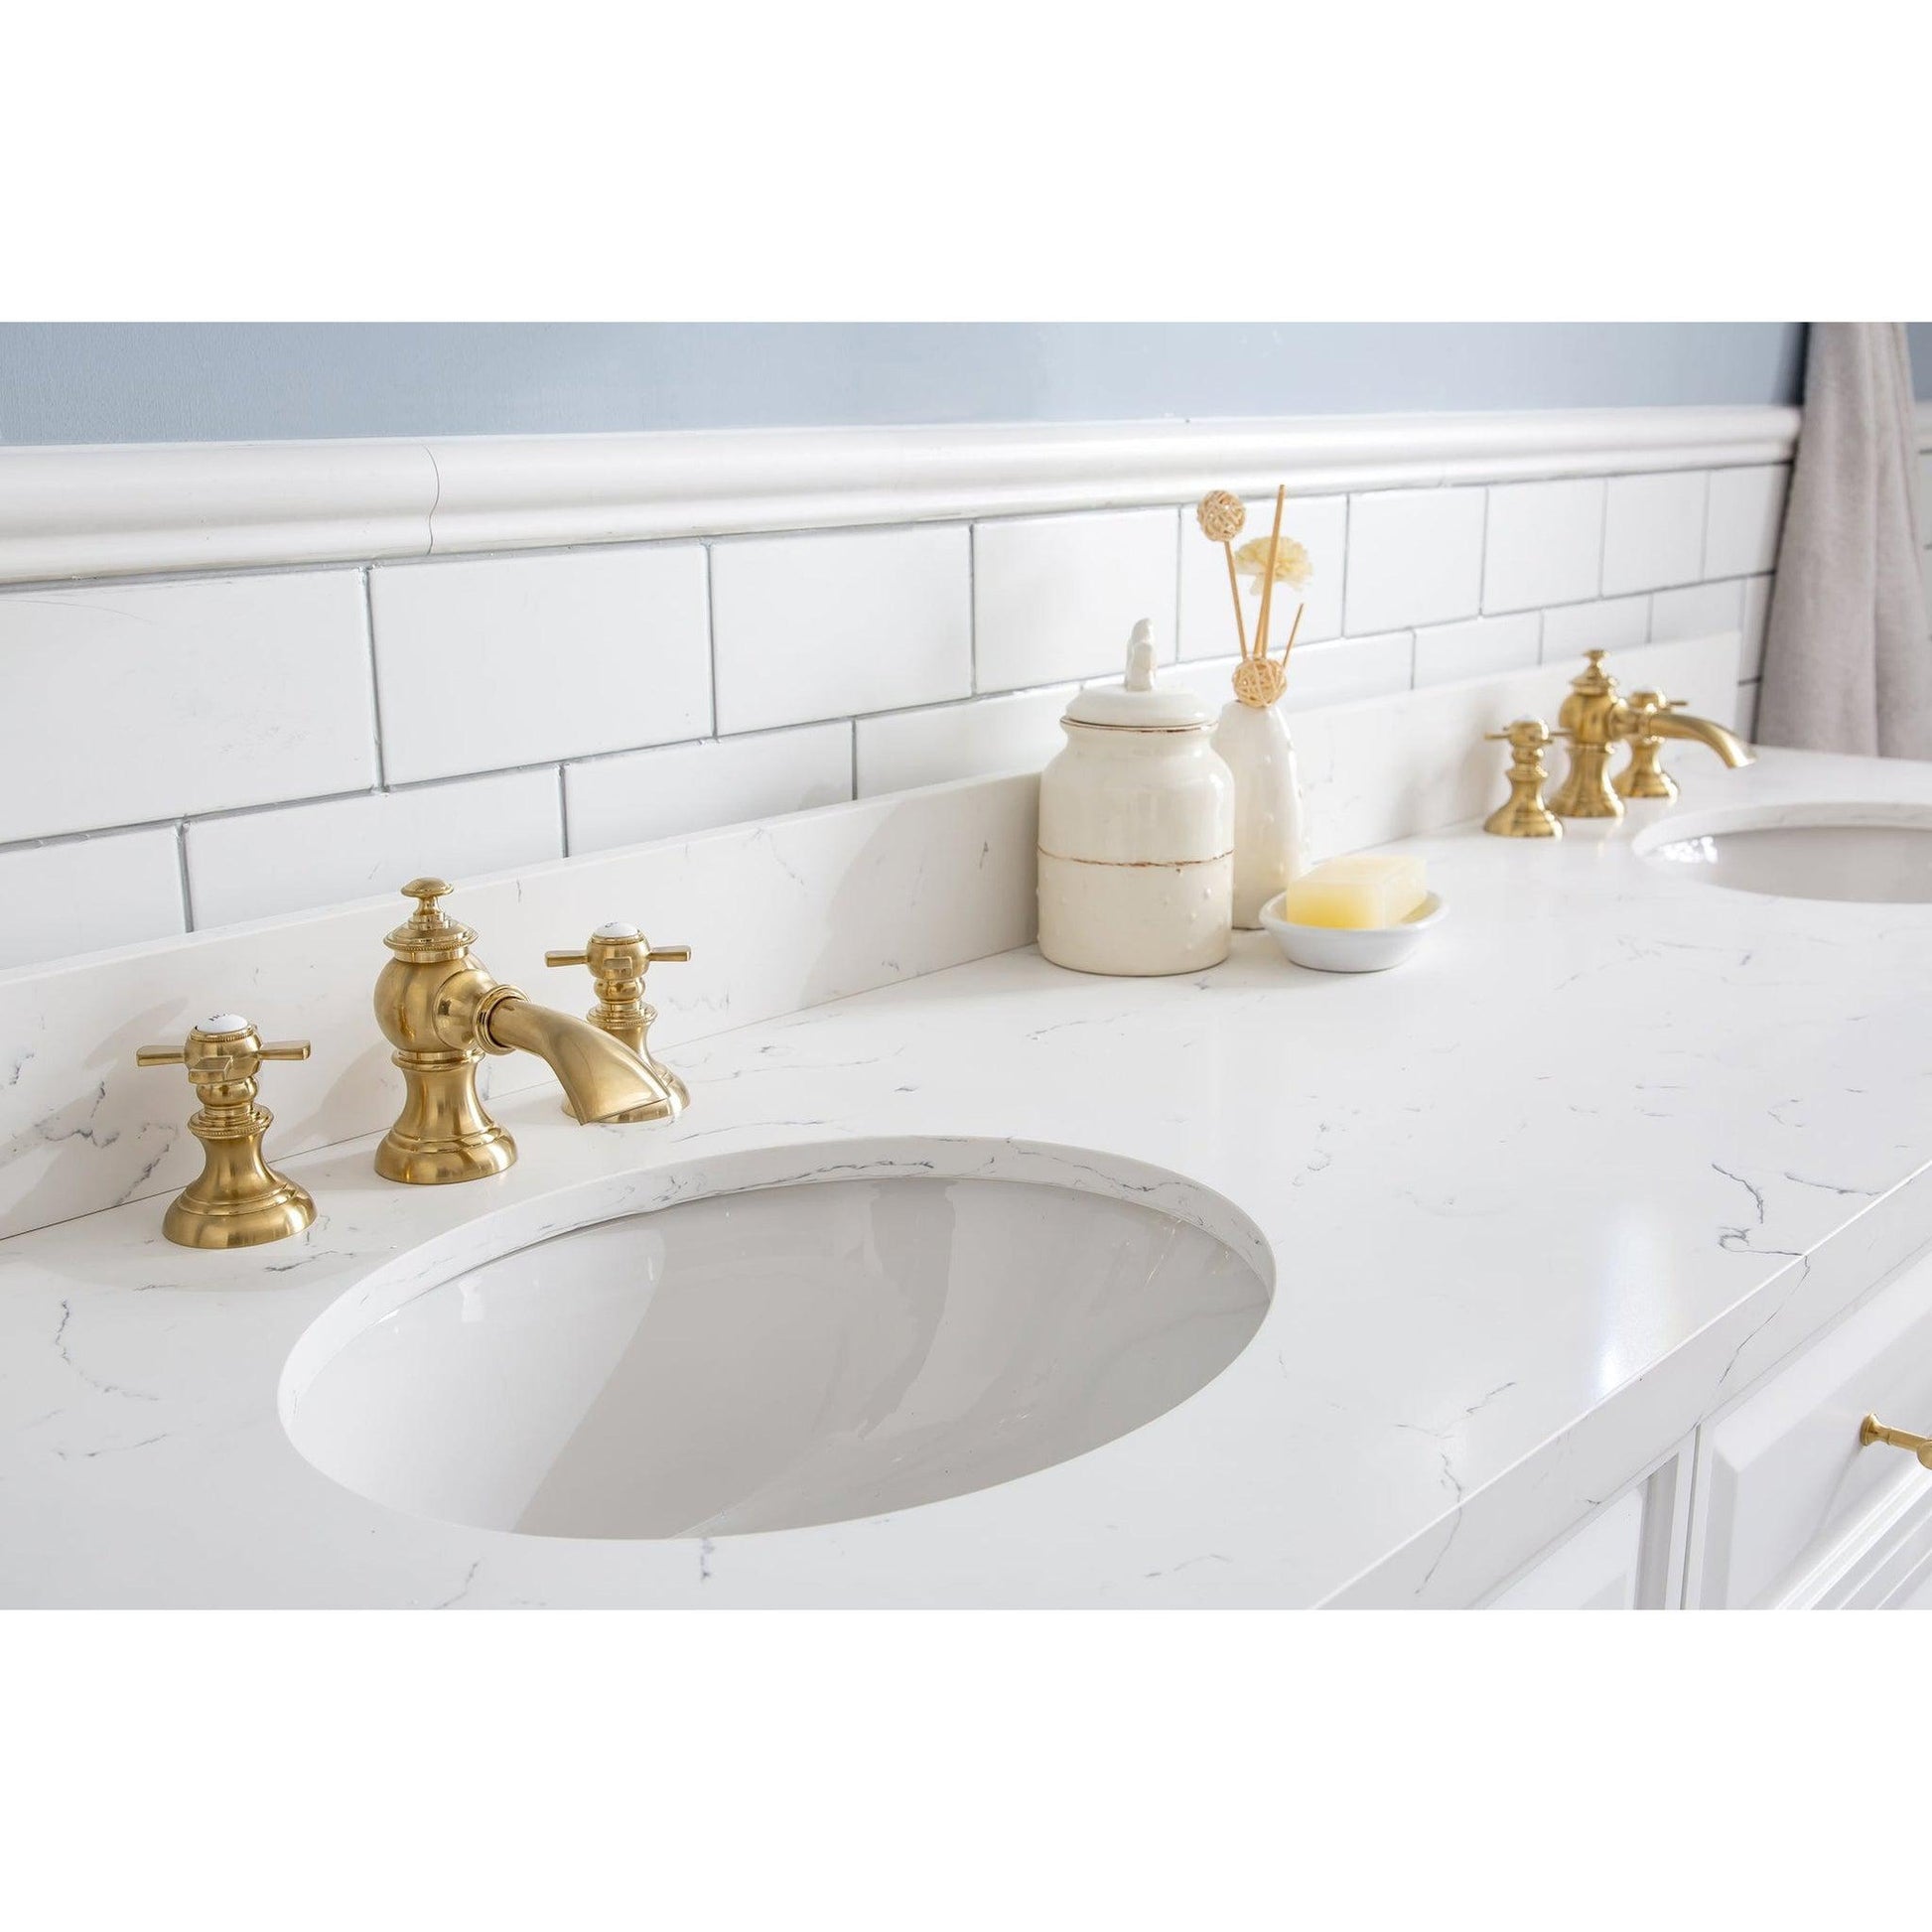 Water Creation Palace 72" Quartz Carrara Pure White Bathroom Vanity Set With Hardware And F2-0013 Faucets in Satin Gold Finish And Mirrors in Chrome Finish